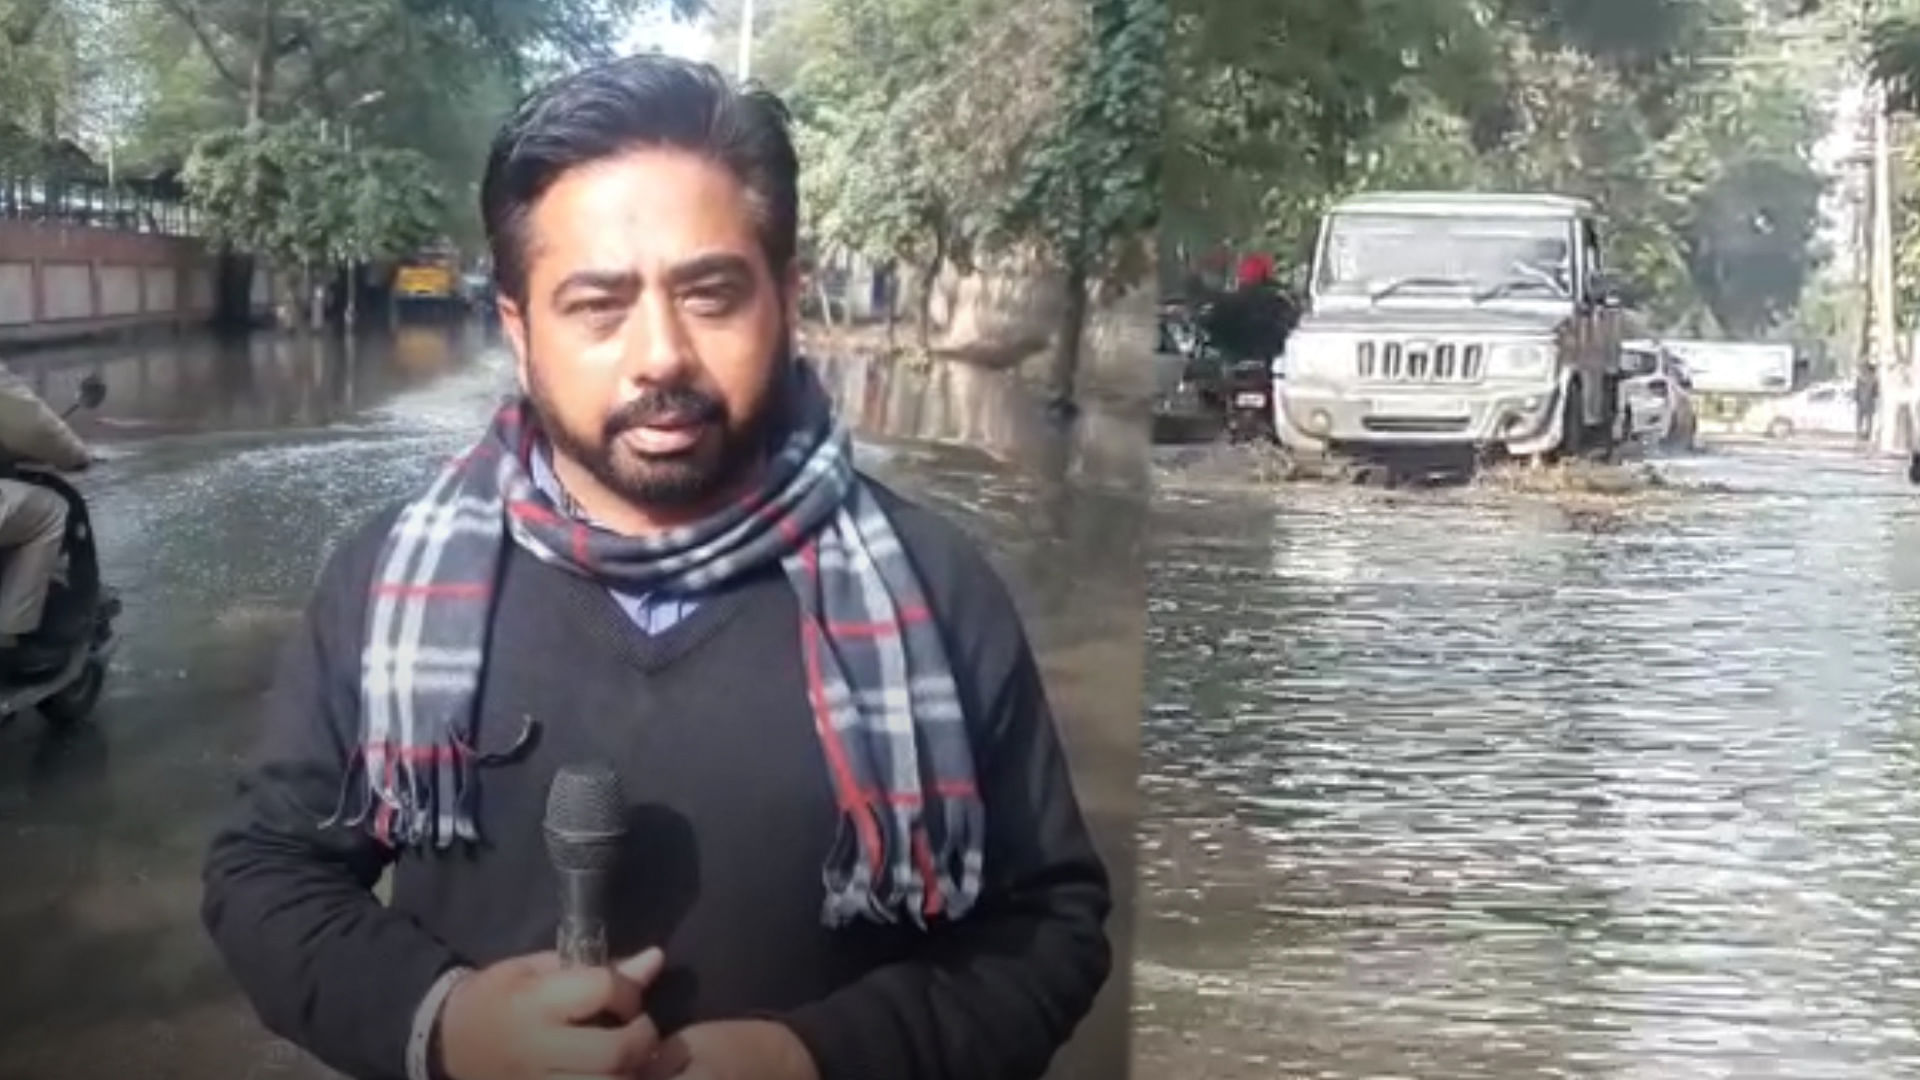 FB journo from Bathinda talks about the poor conditions of the roads (Photo: The Quint)